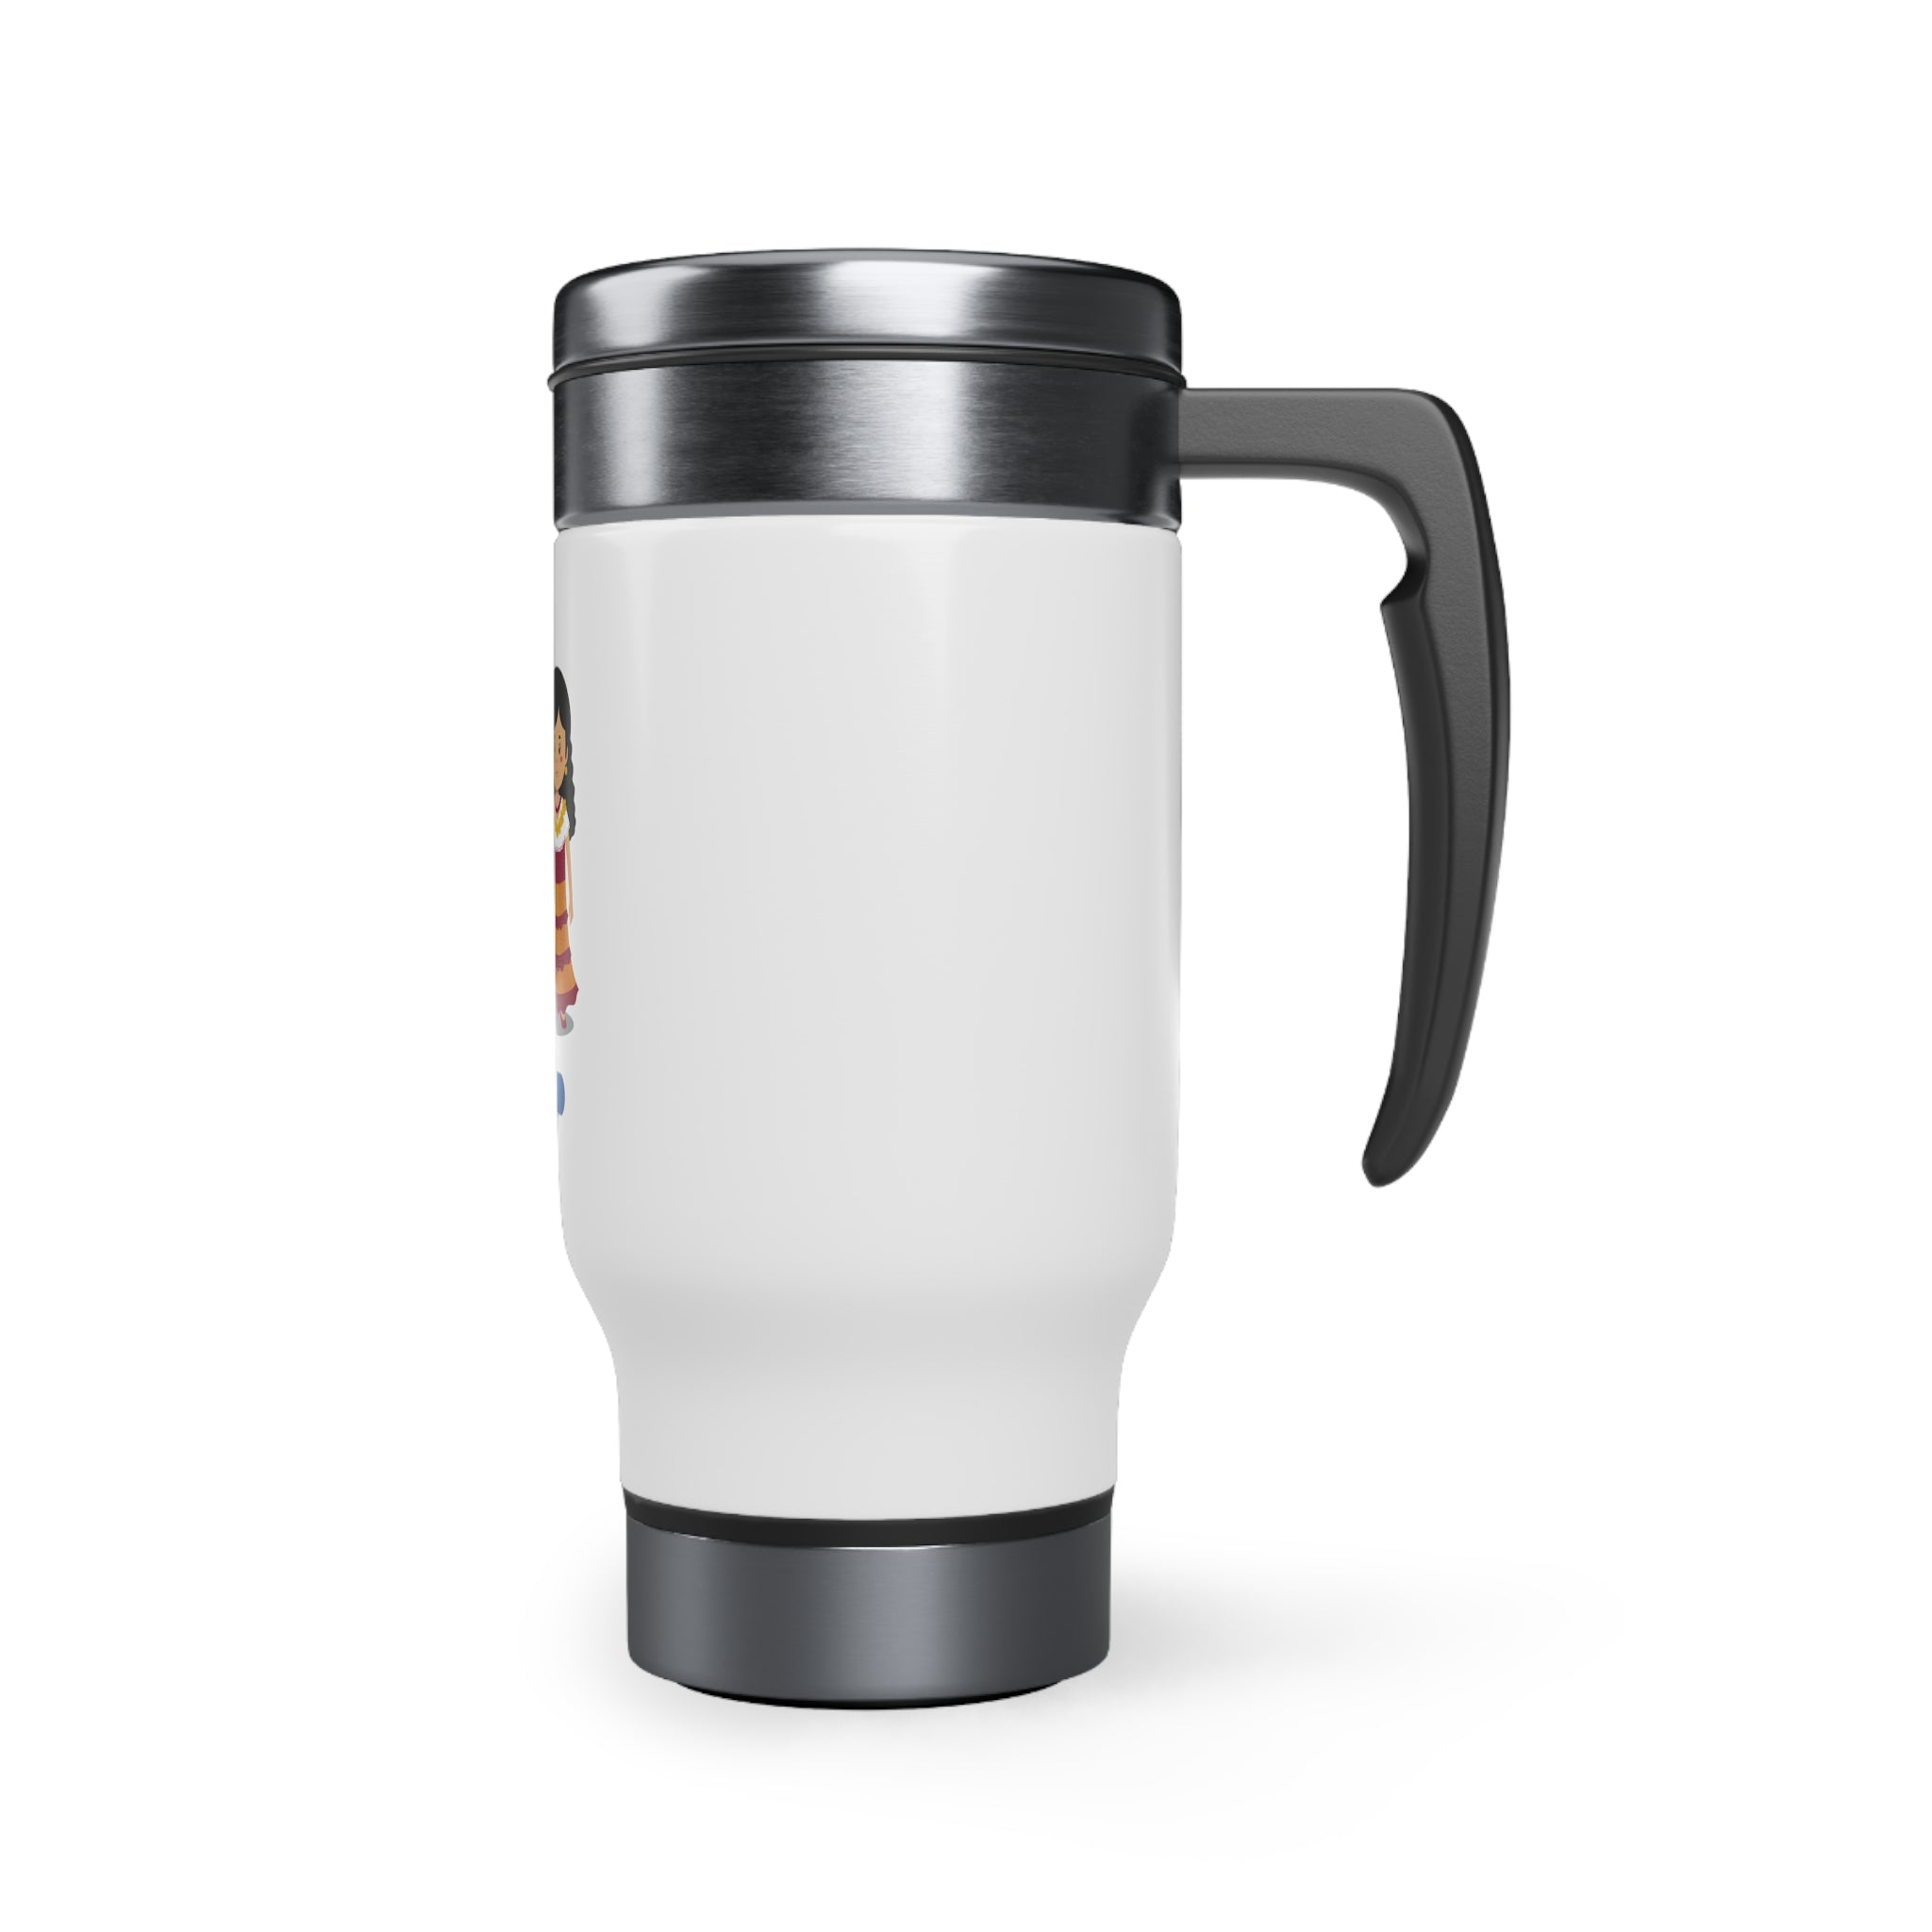 Mexico Stainless Steel Travel Mug with Handle, 14oz